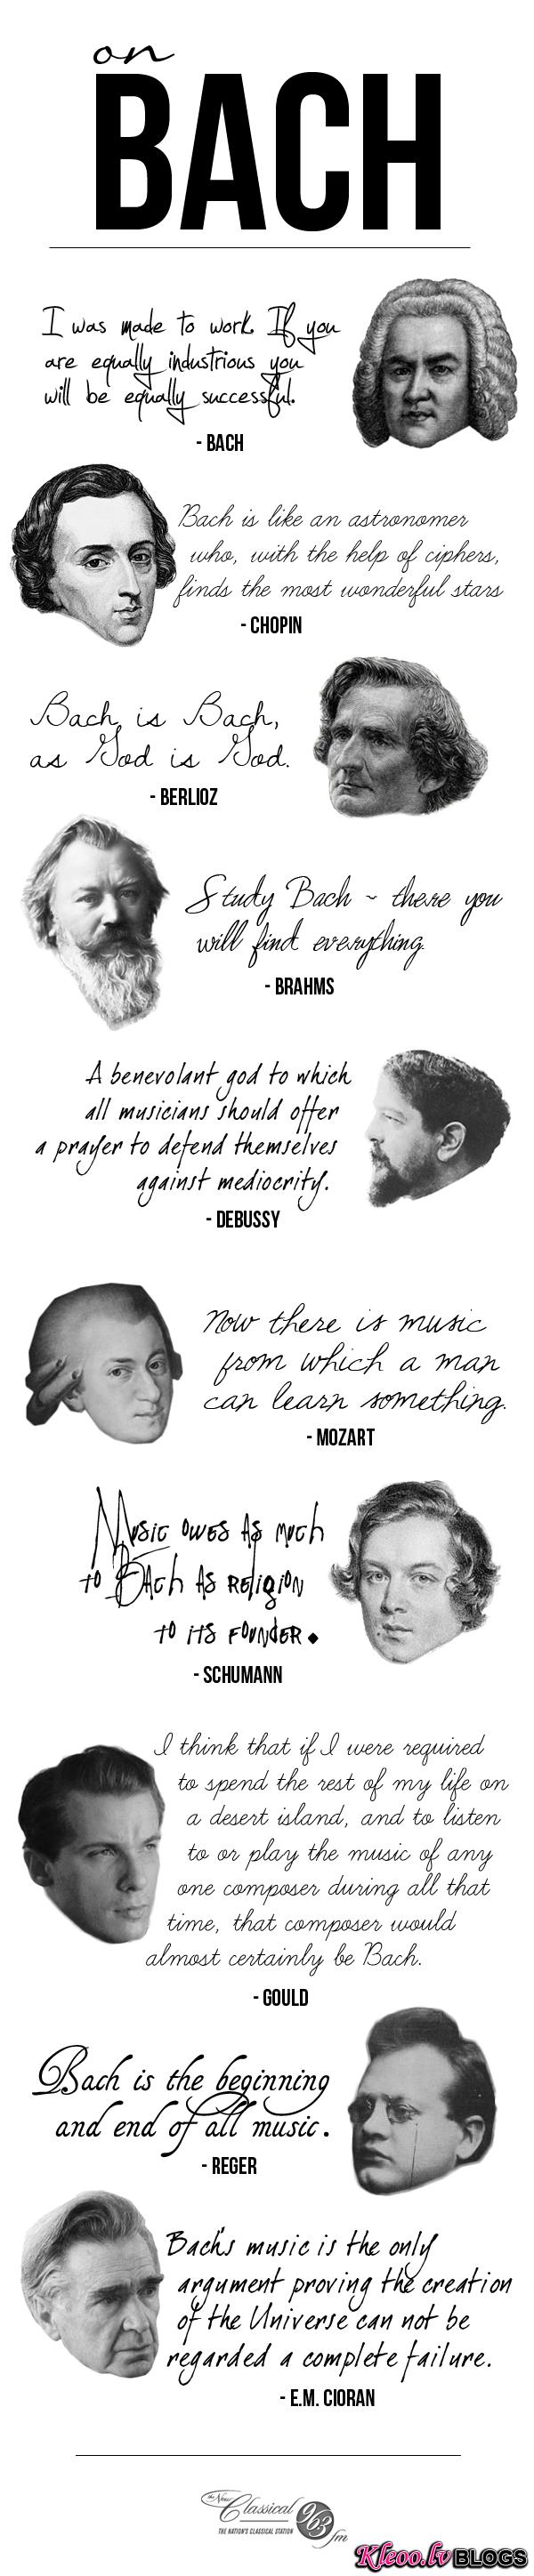 bach-quotes.png